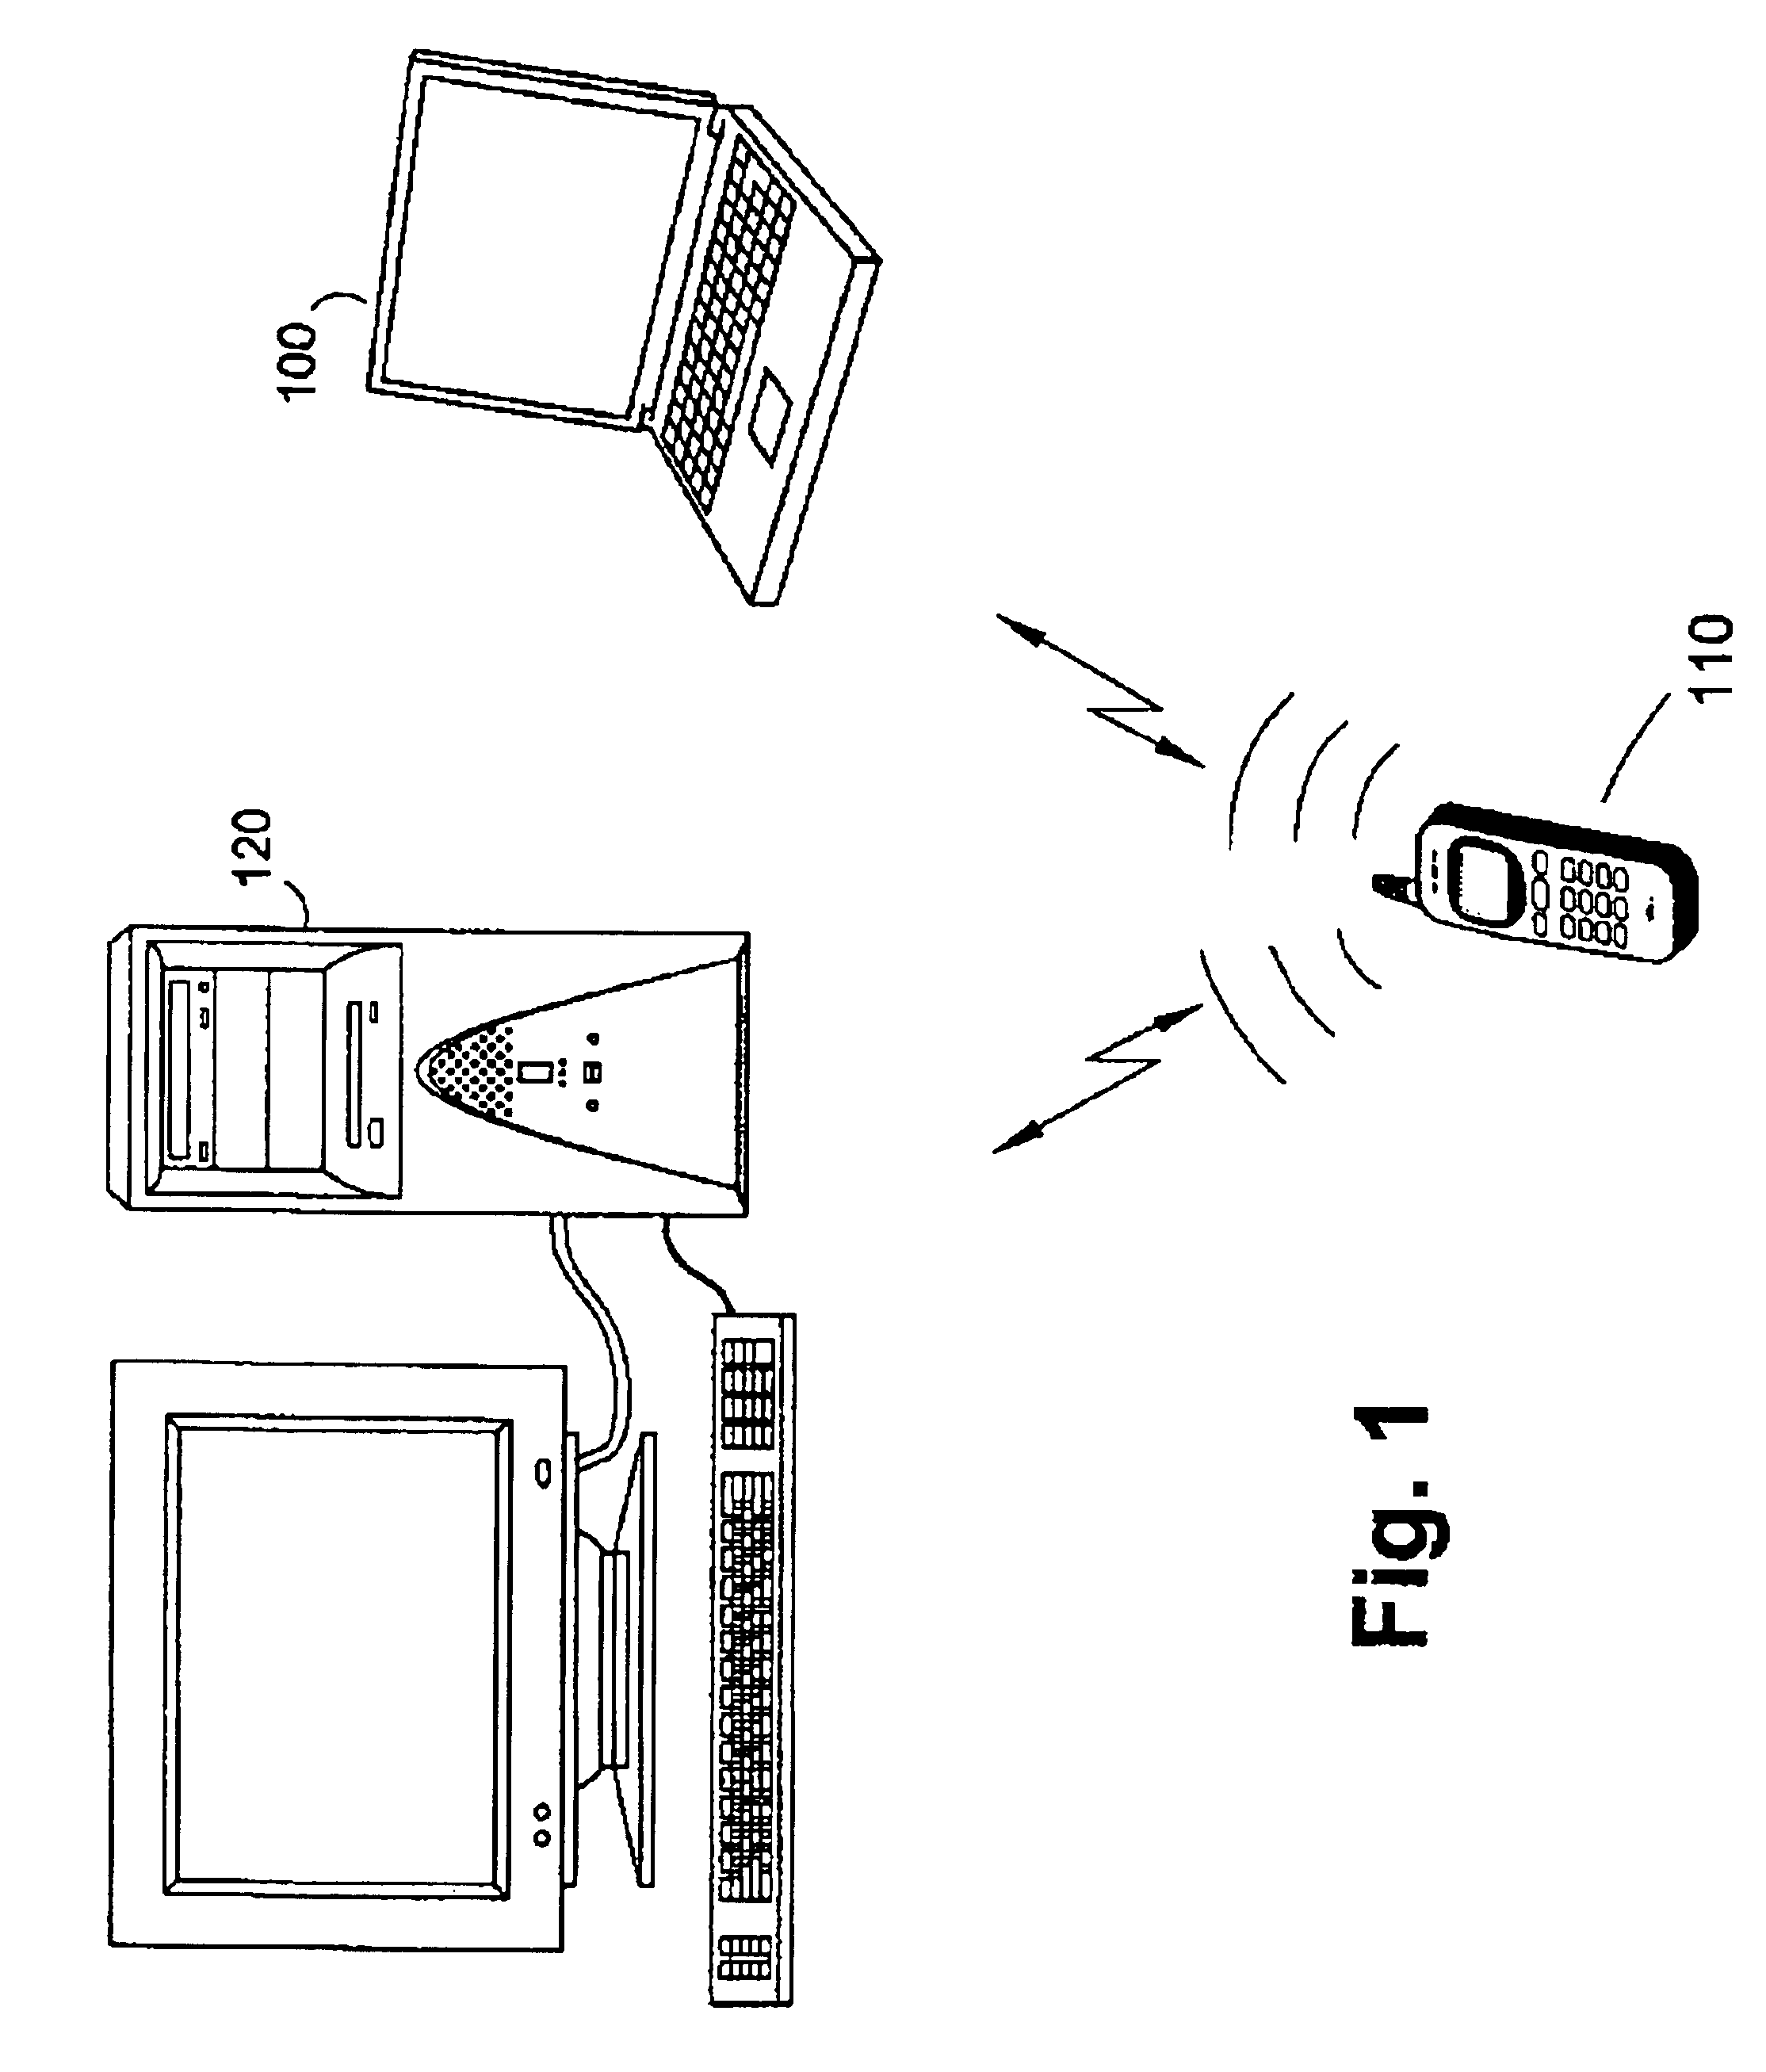 Standardized RF module insert for a portable electronic processing device